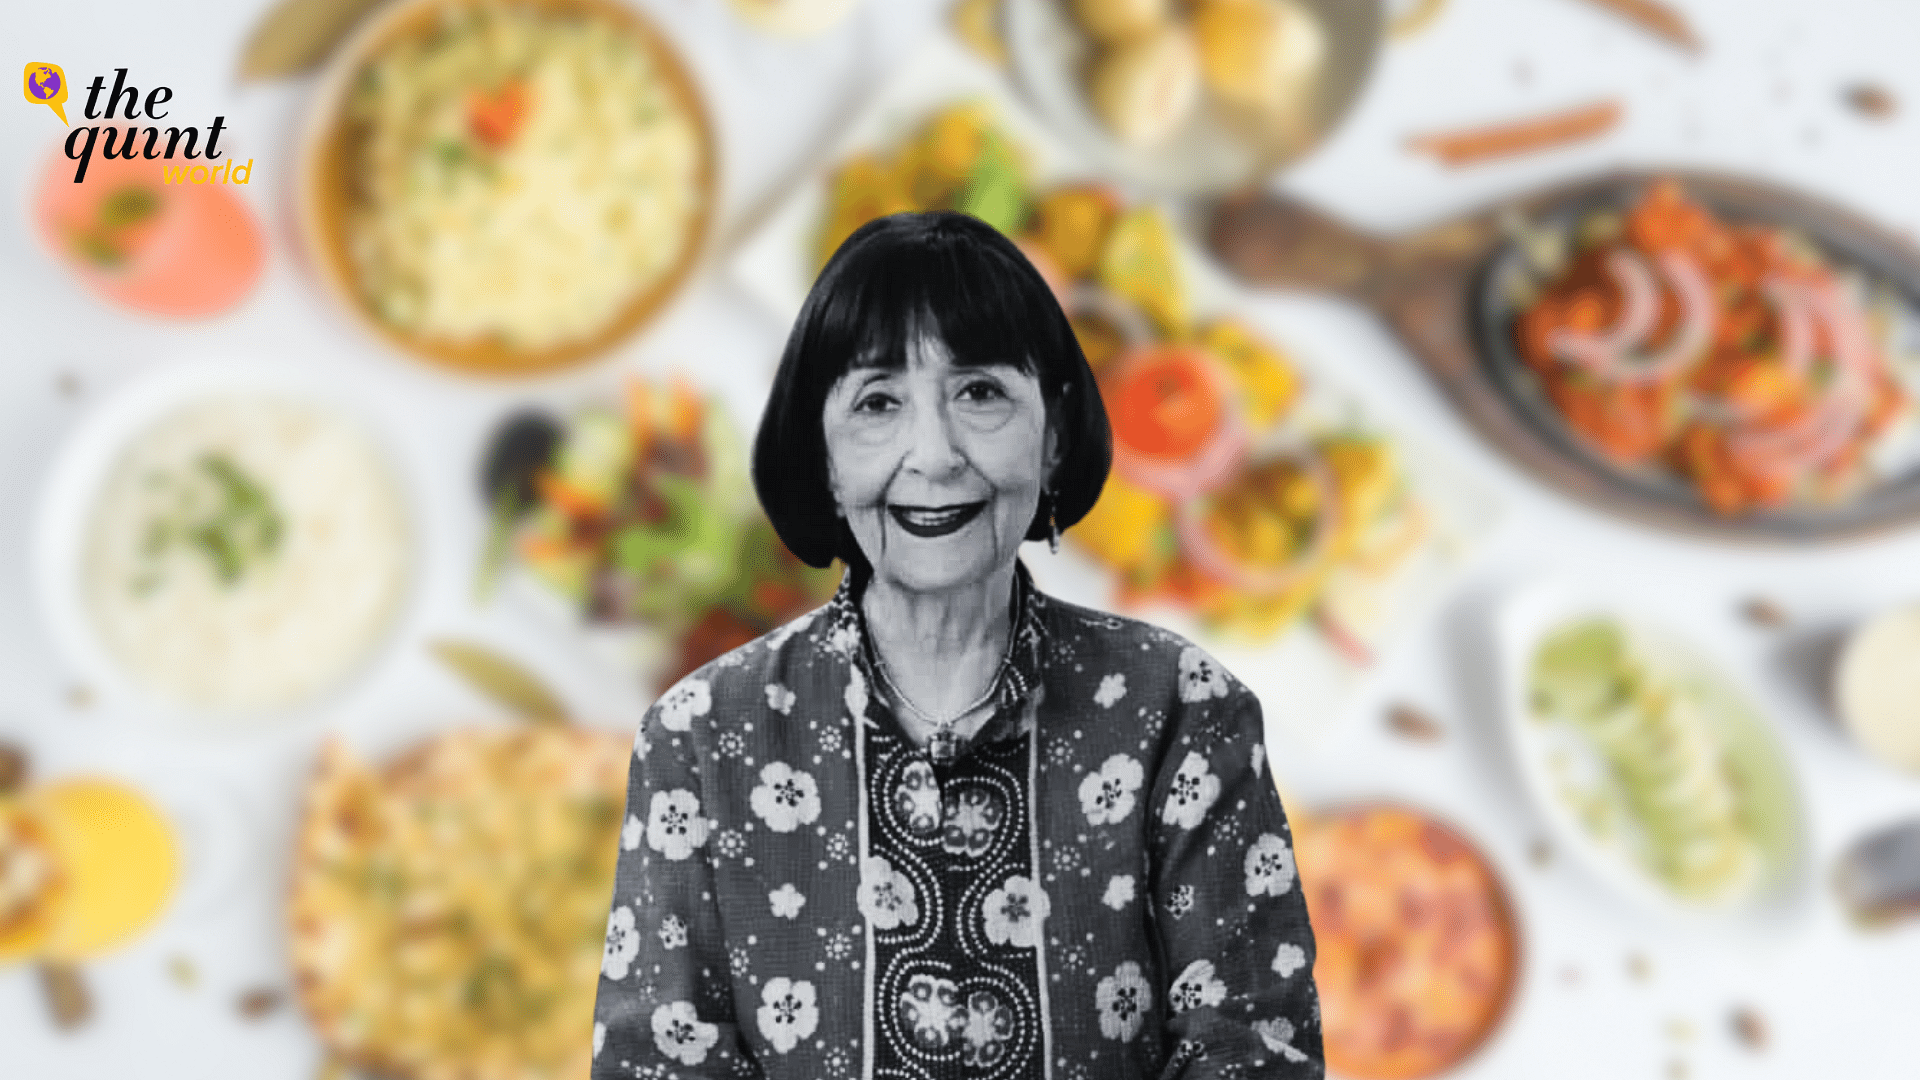 First South Asian To Win the James Beard Lifetime Award Who Is Madhur Jaffrey?